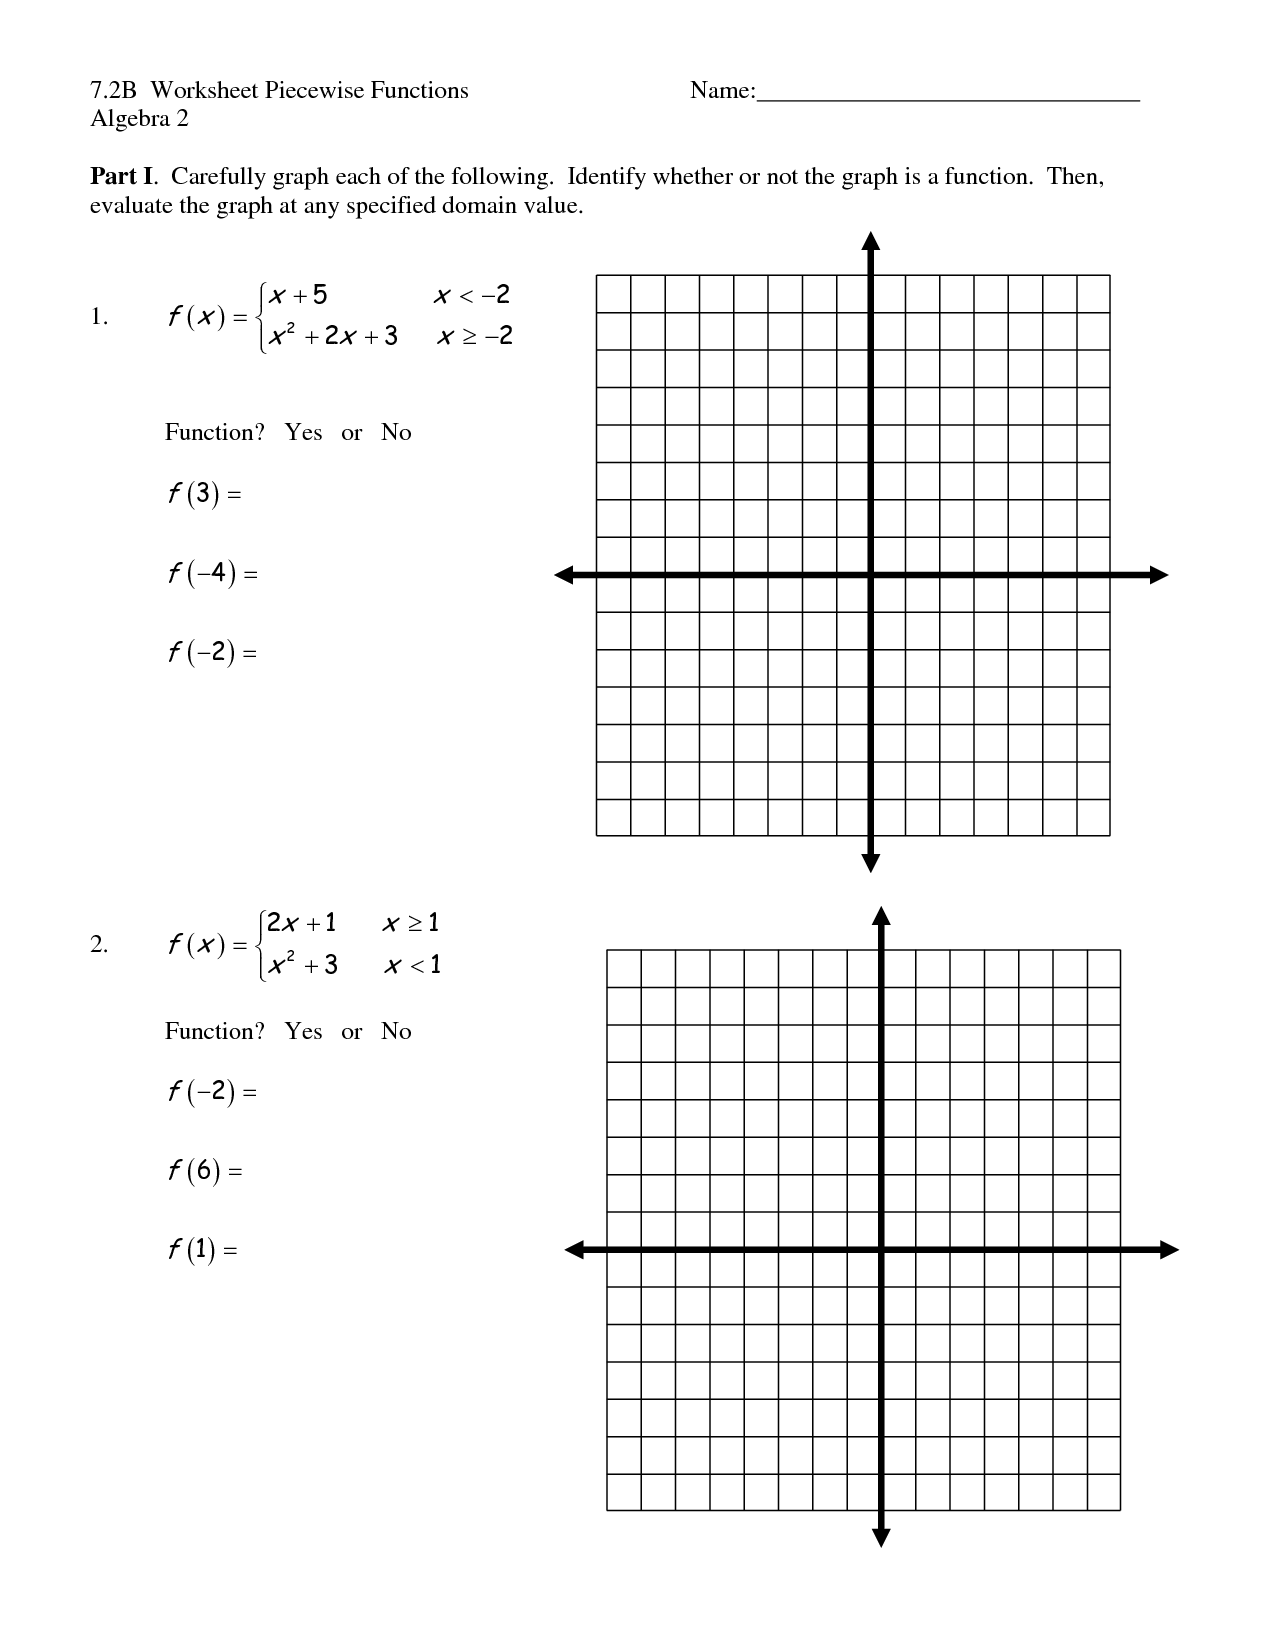 Piecewise Functions Practice Worksheet With Answers - Nidecmege In Evaluating Piecewise Functions Worksheet